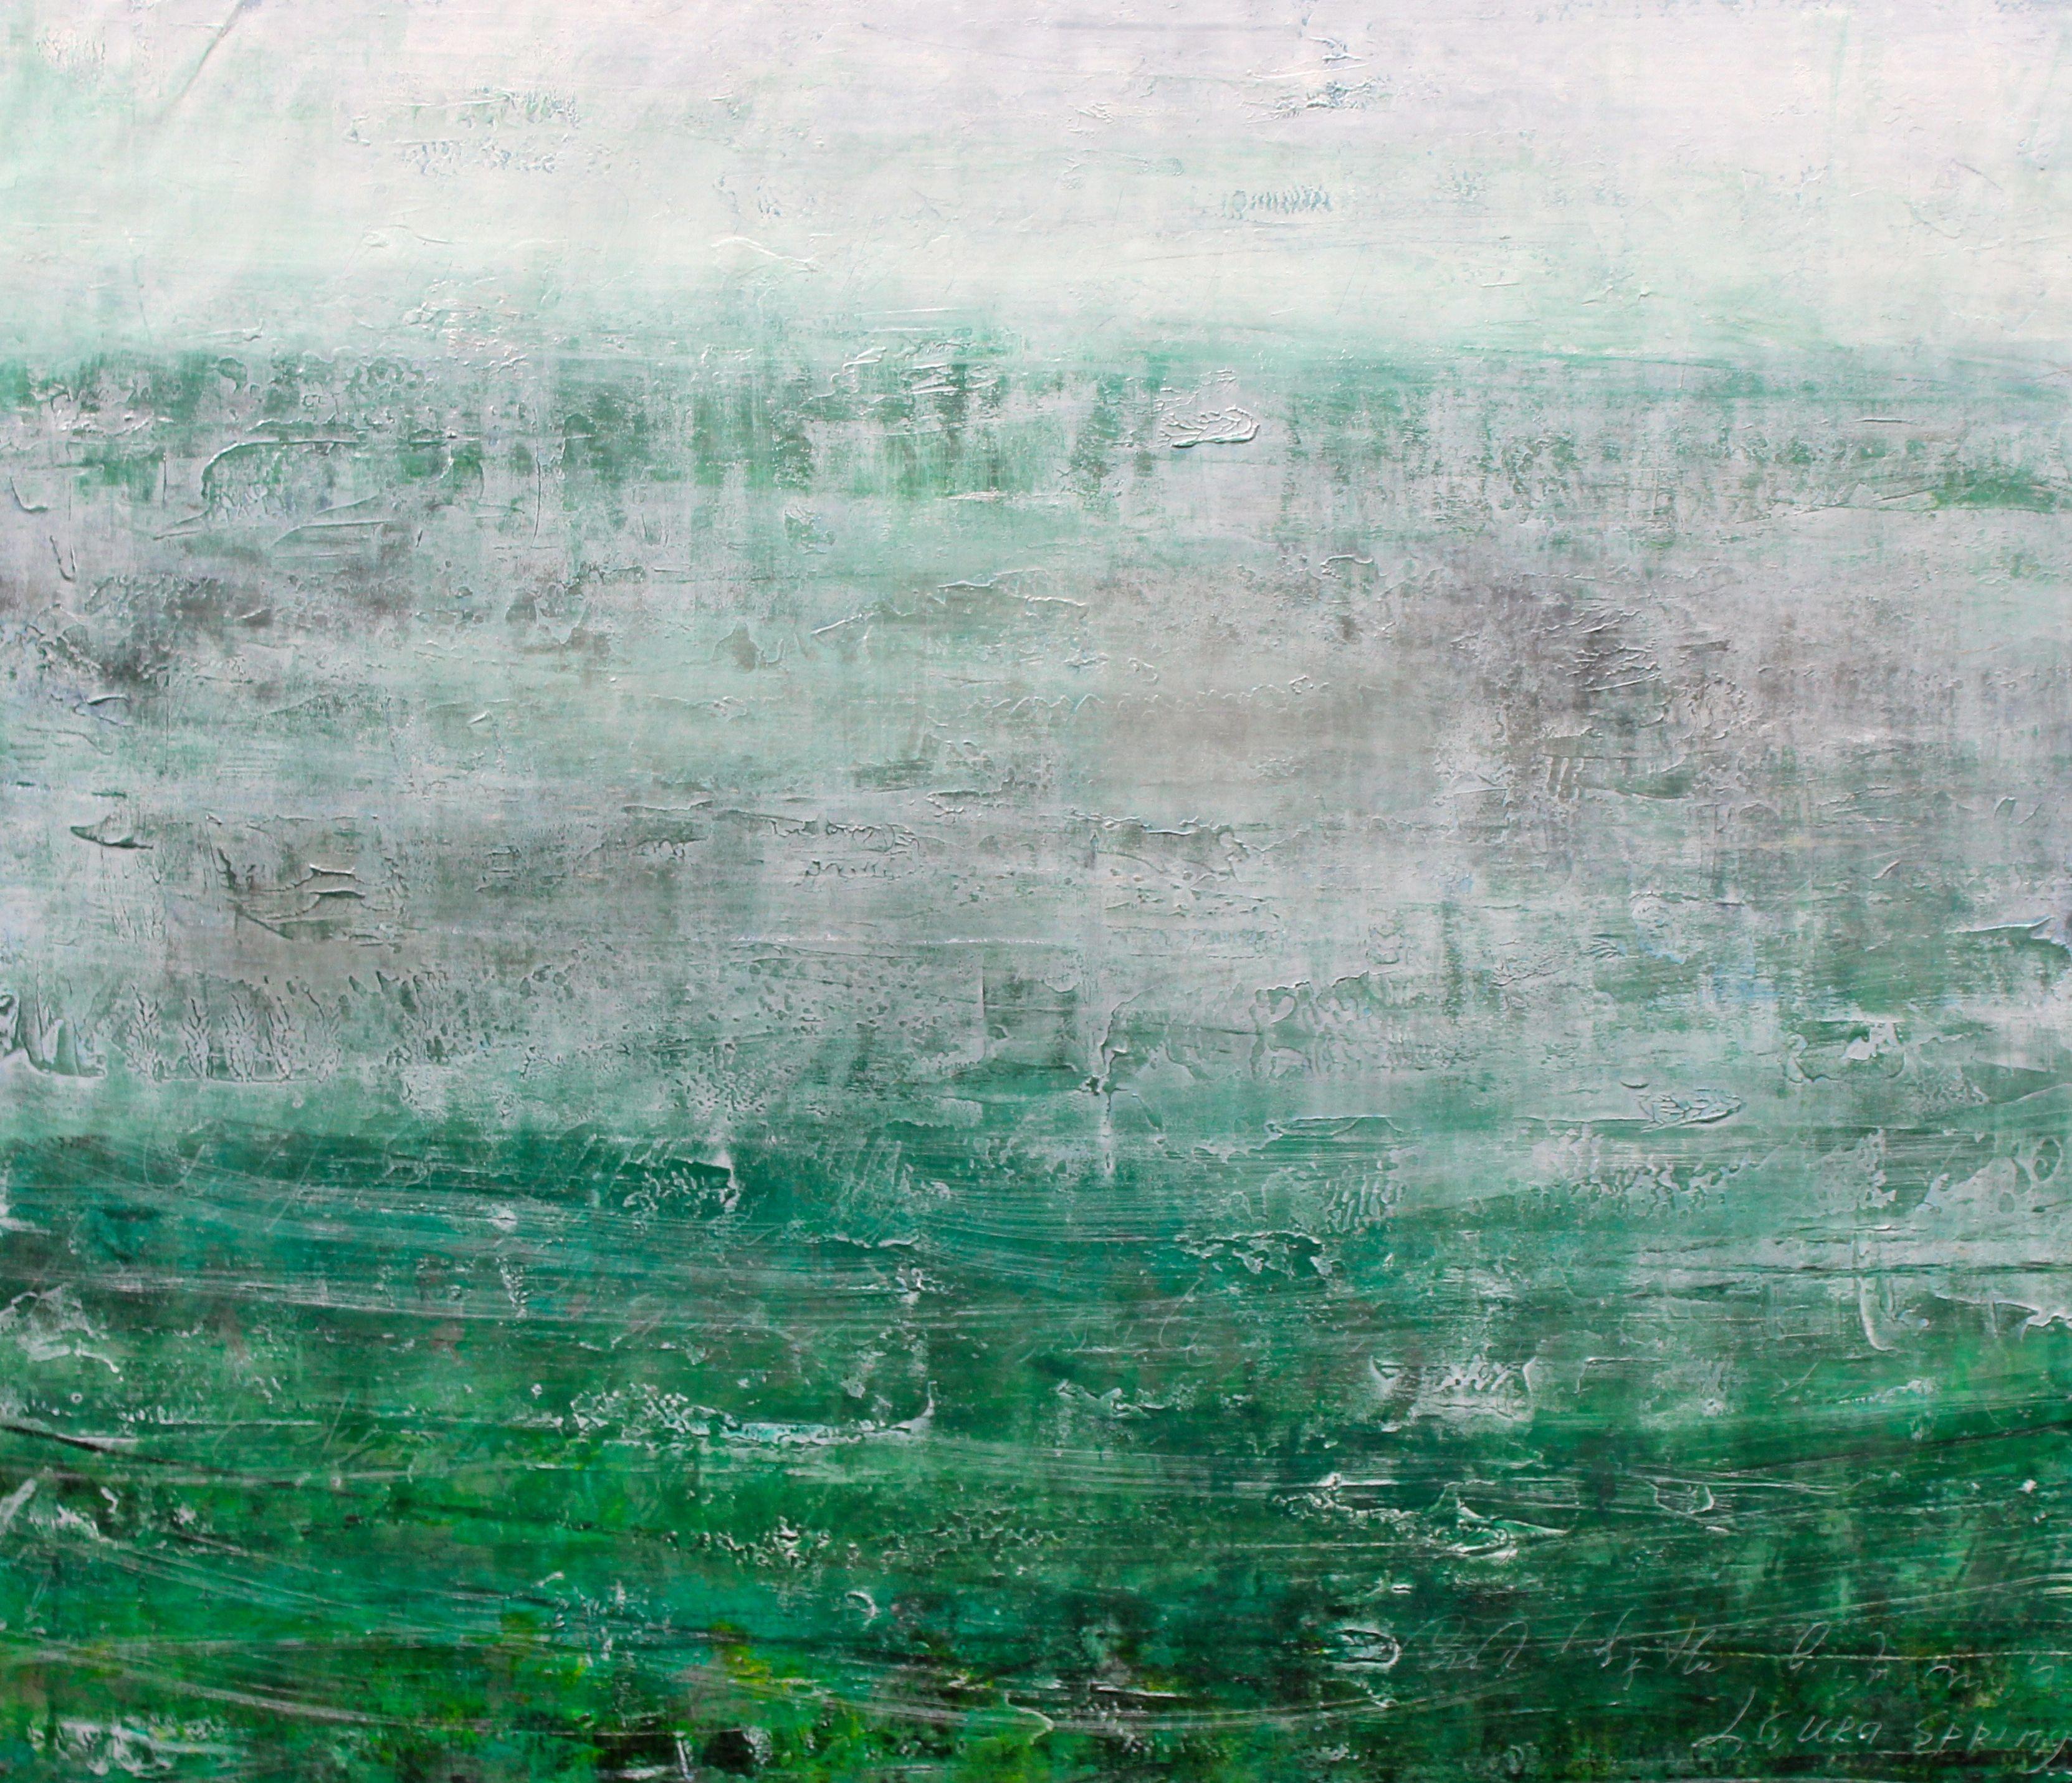 Laura Spring Abstract Painting - Similar Commission of "The Mist" Painting, Acrylic on Paper